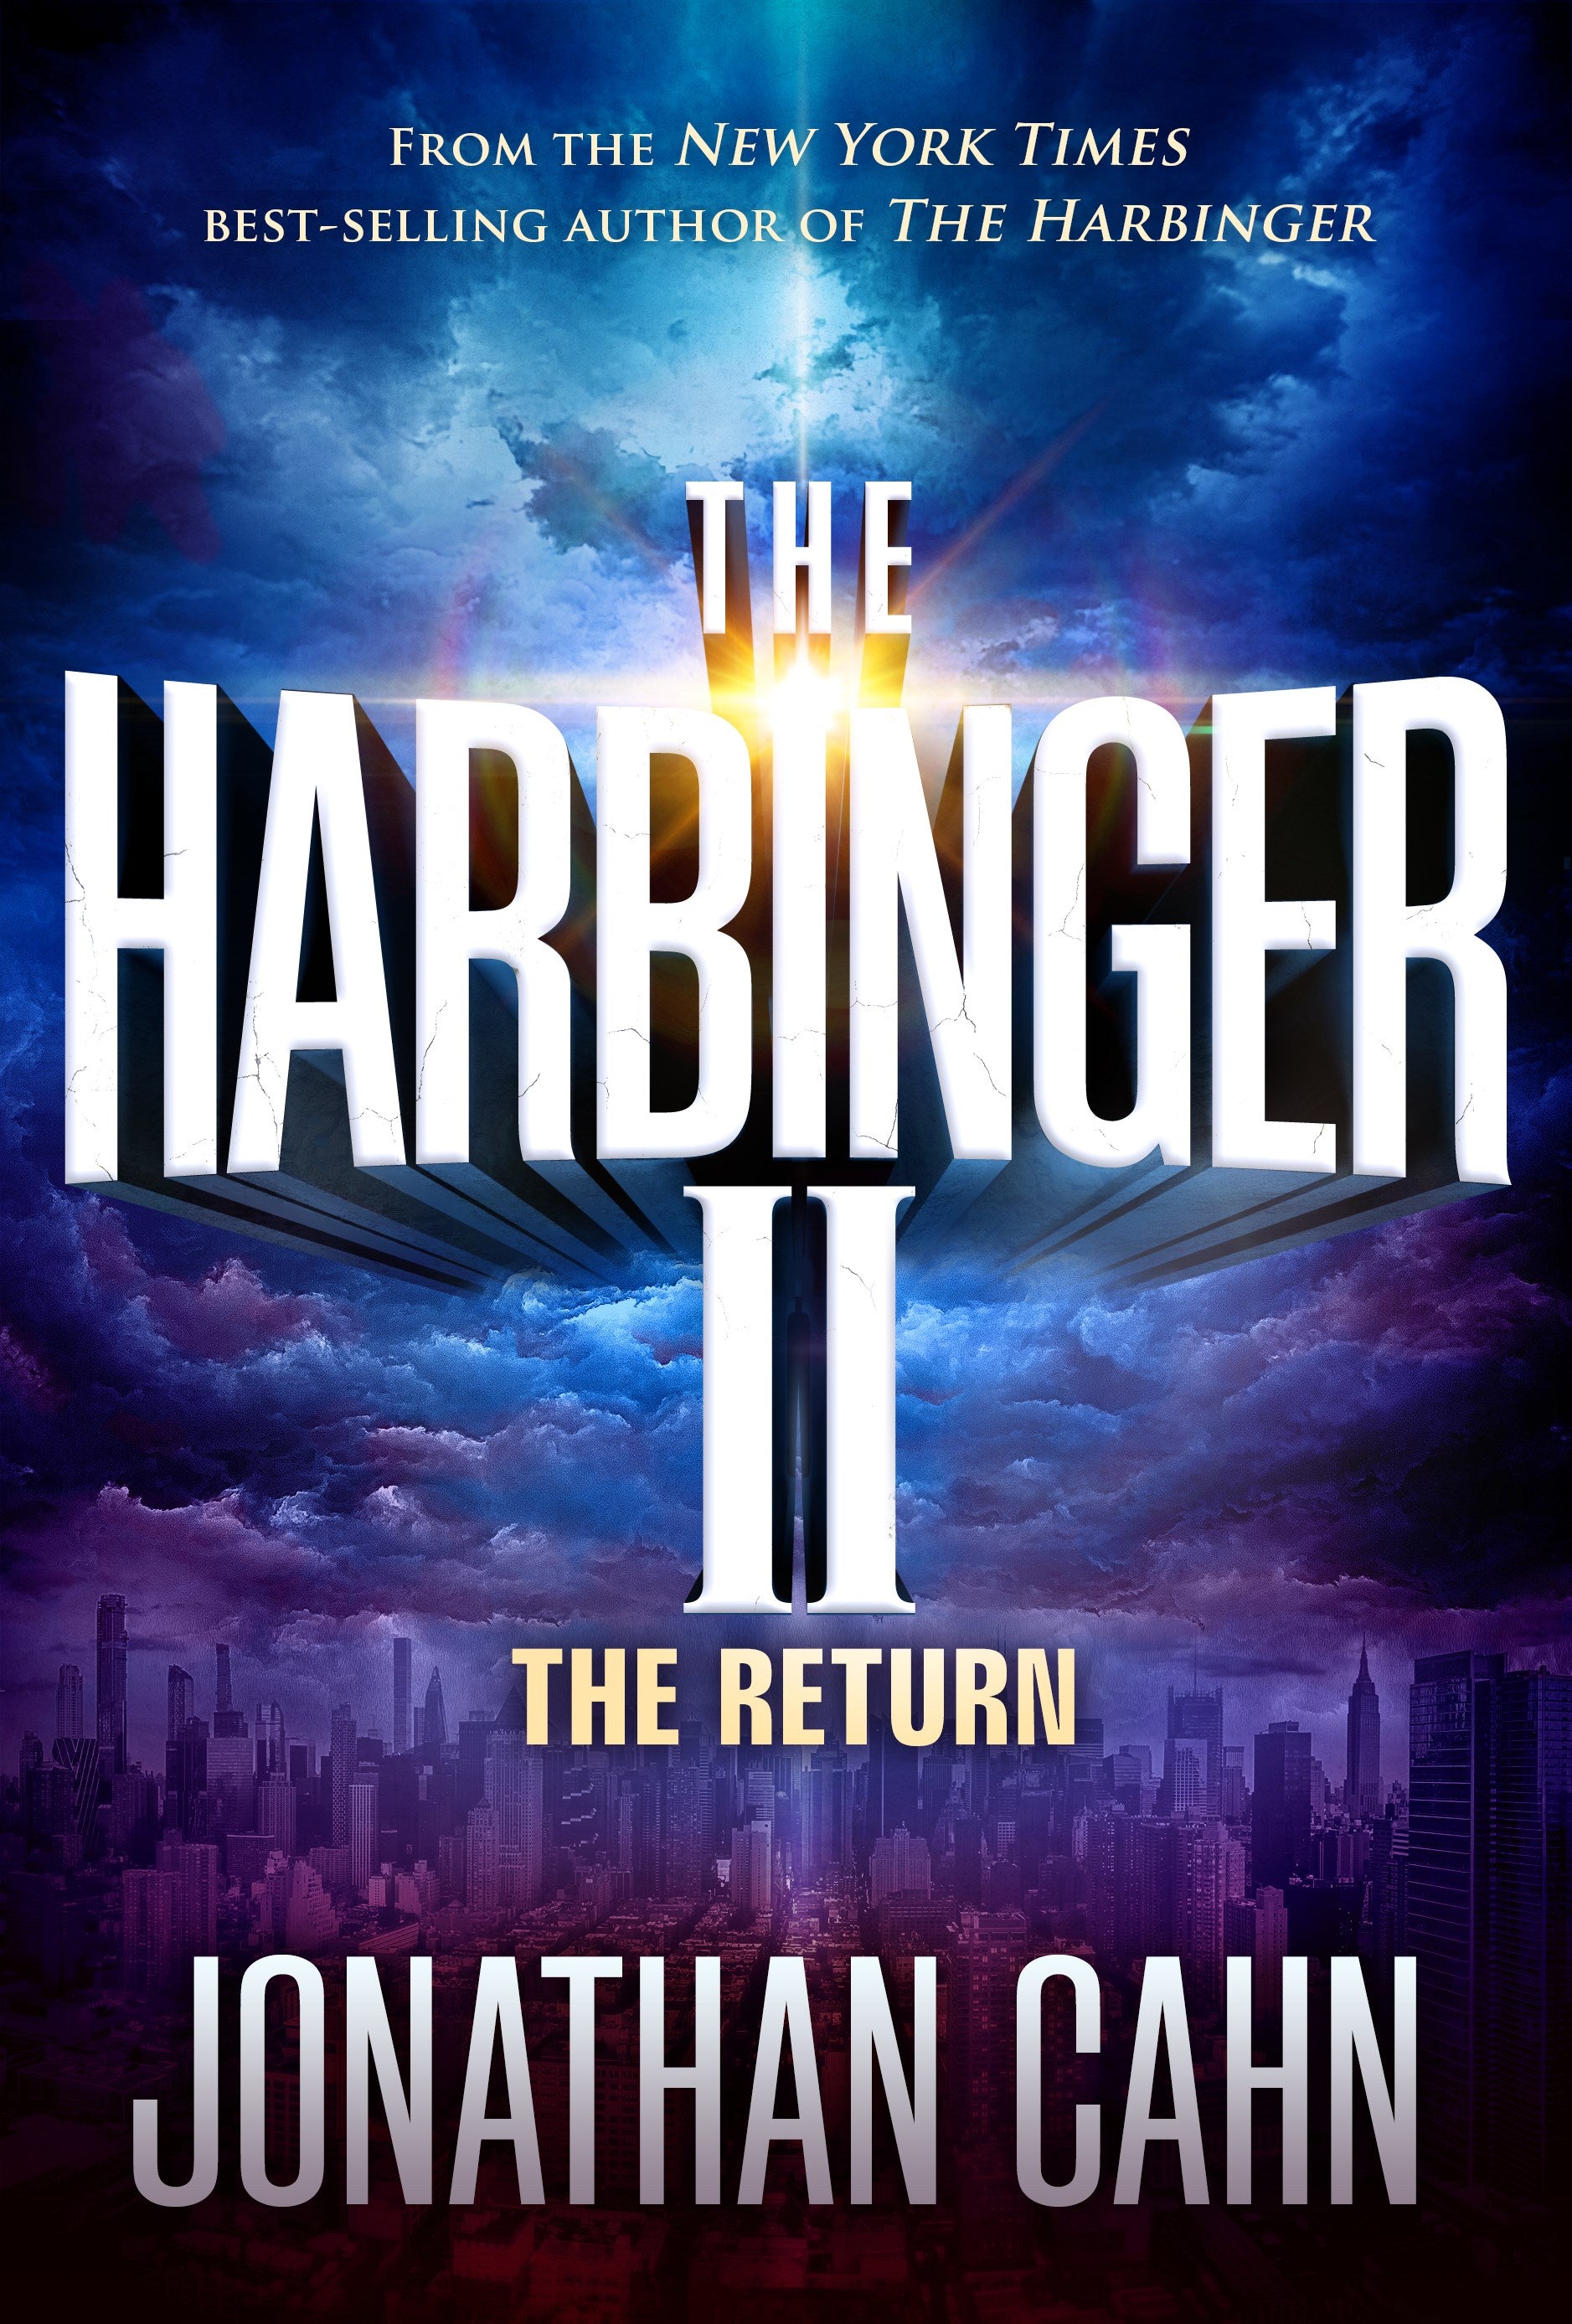 Image of The Harbinger II other